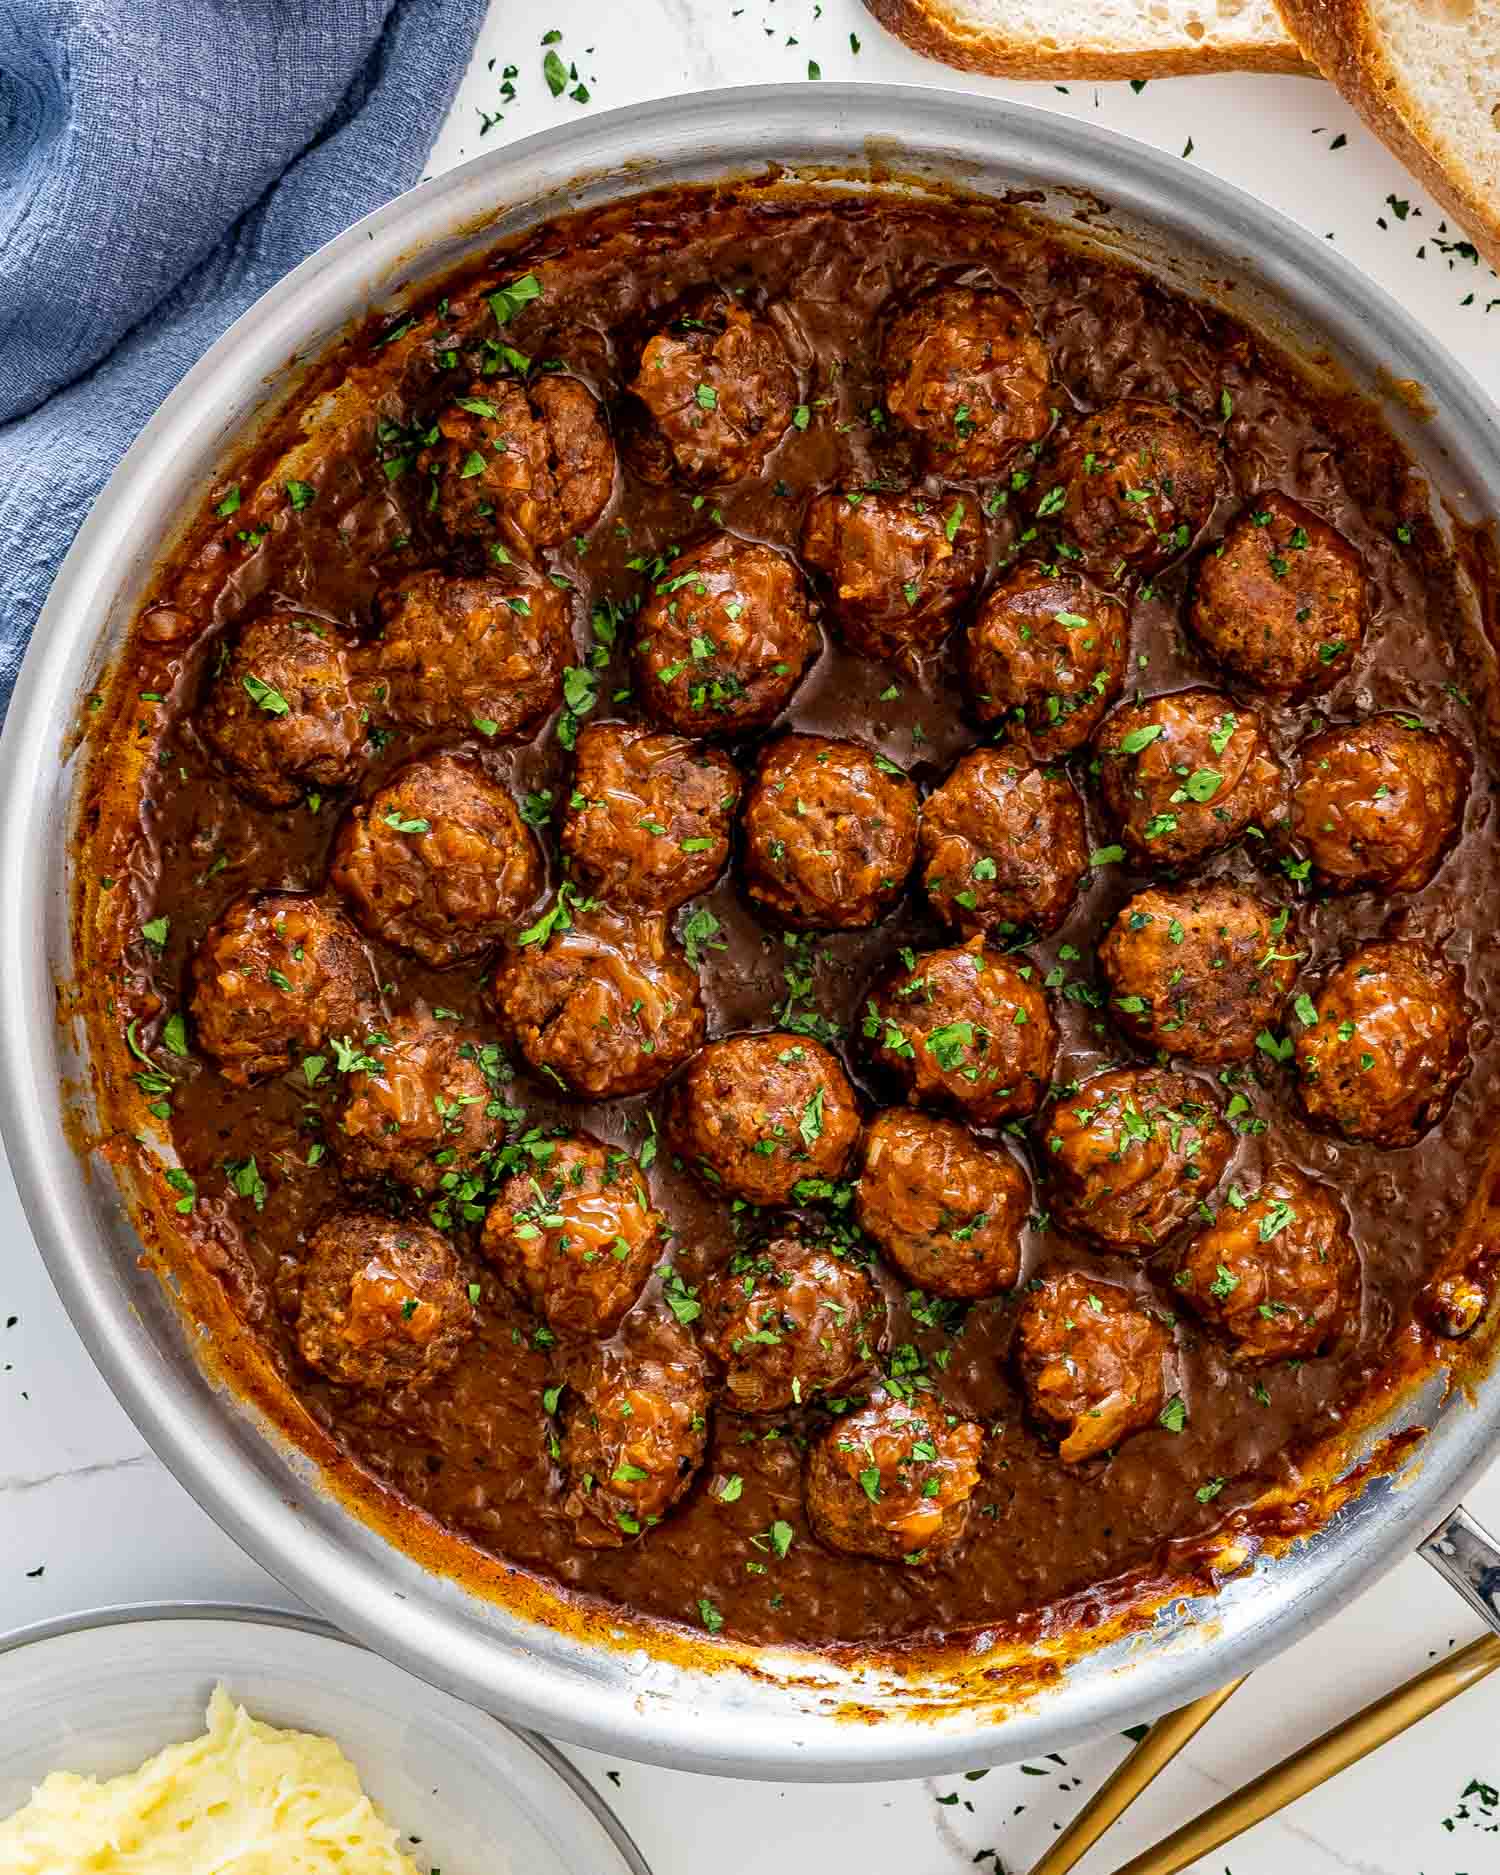 salisbury steak meatballs with gravy in a skillet garnished with parsley.